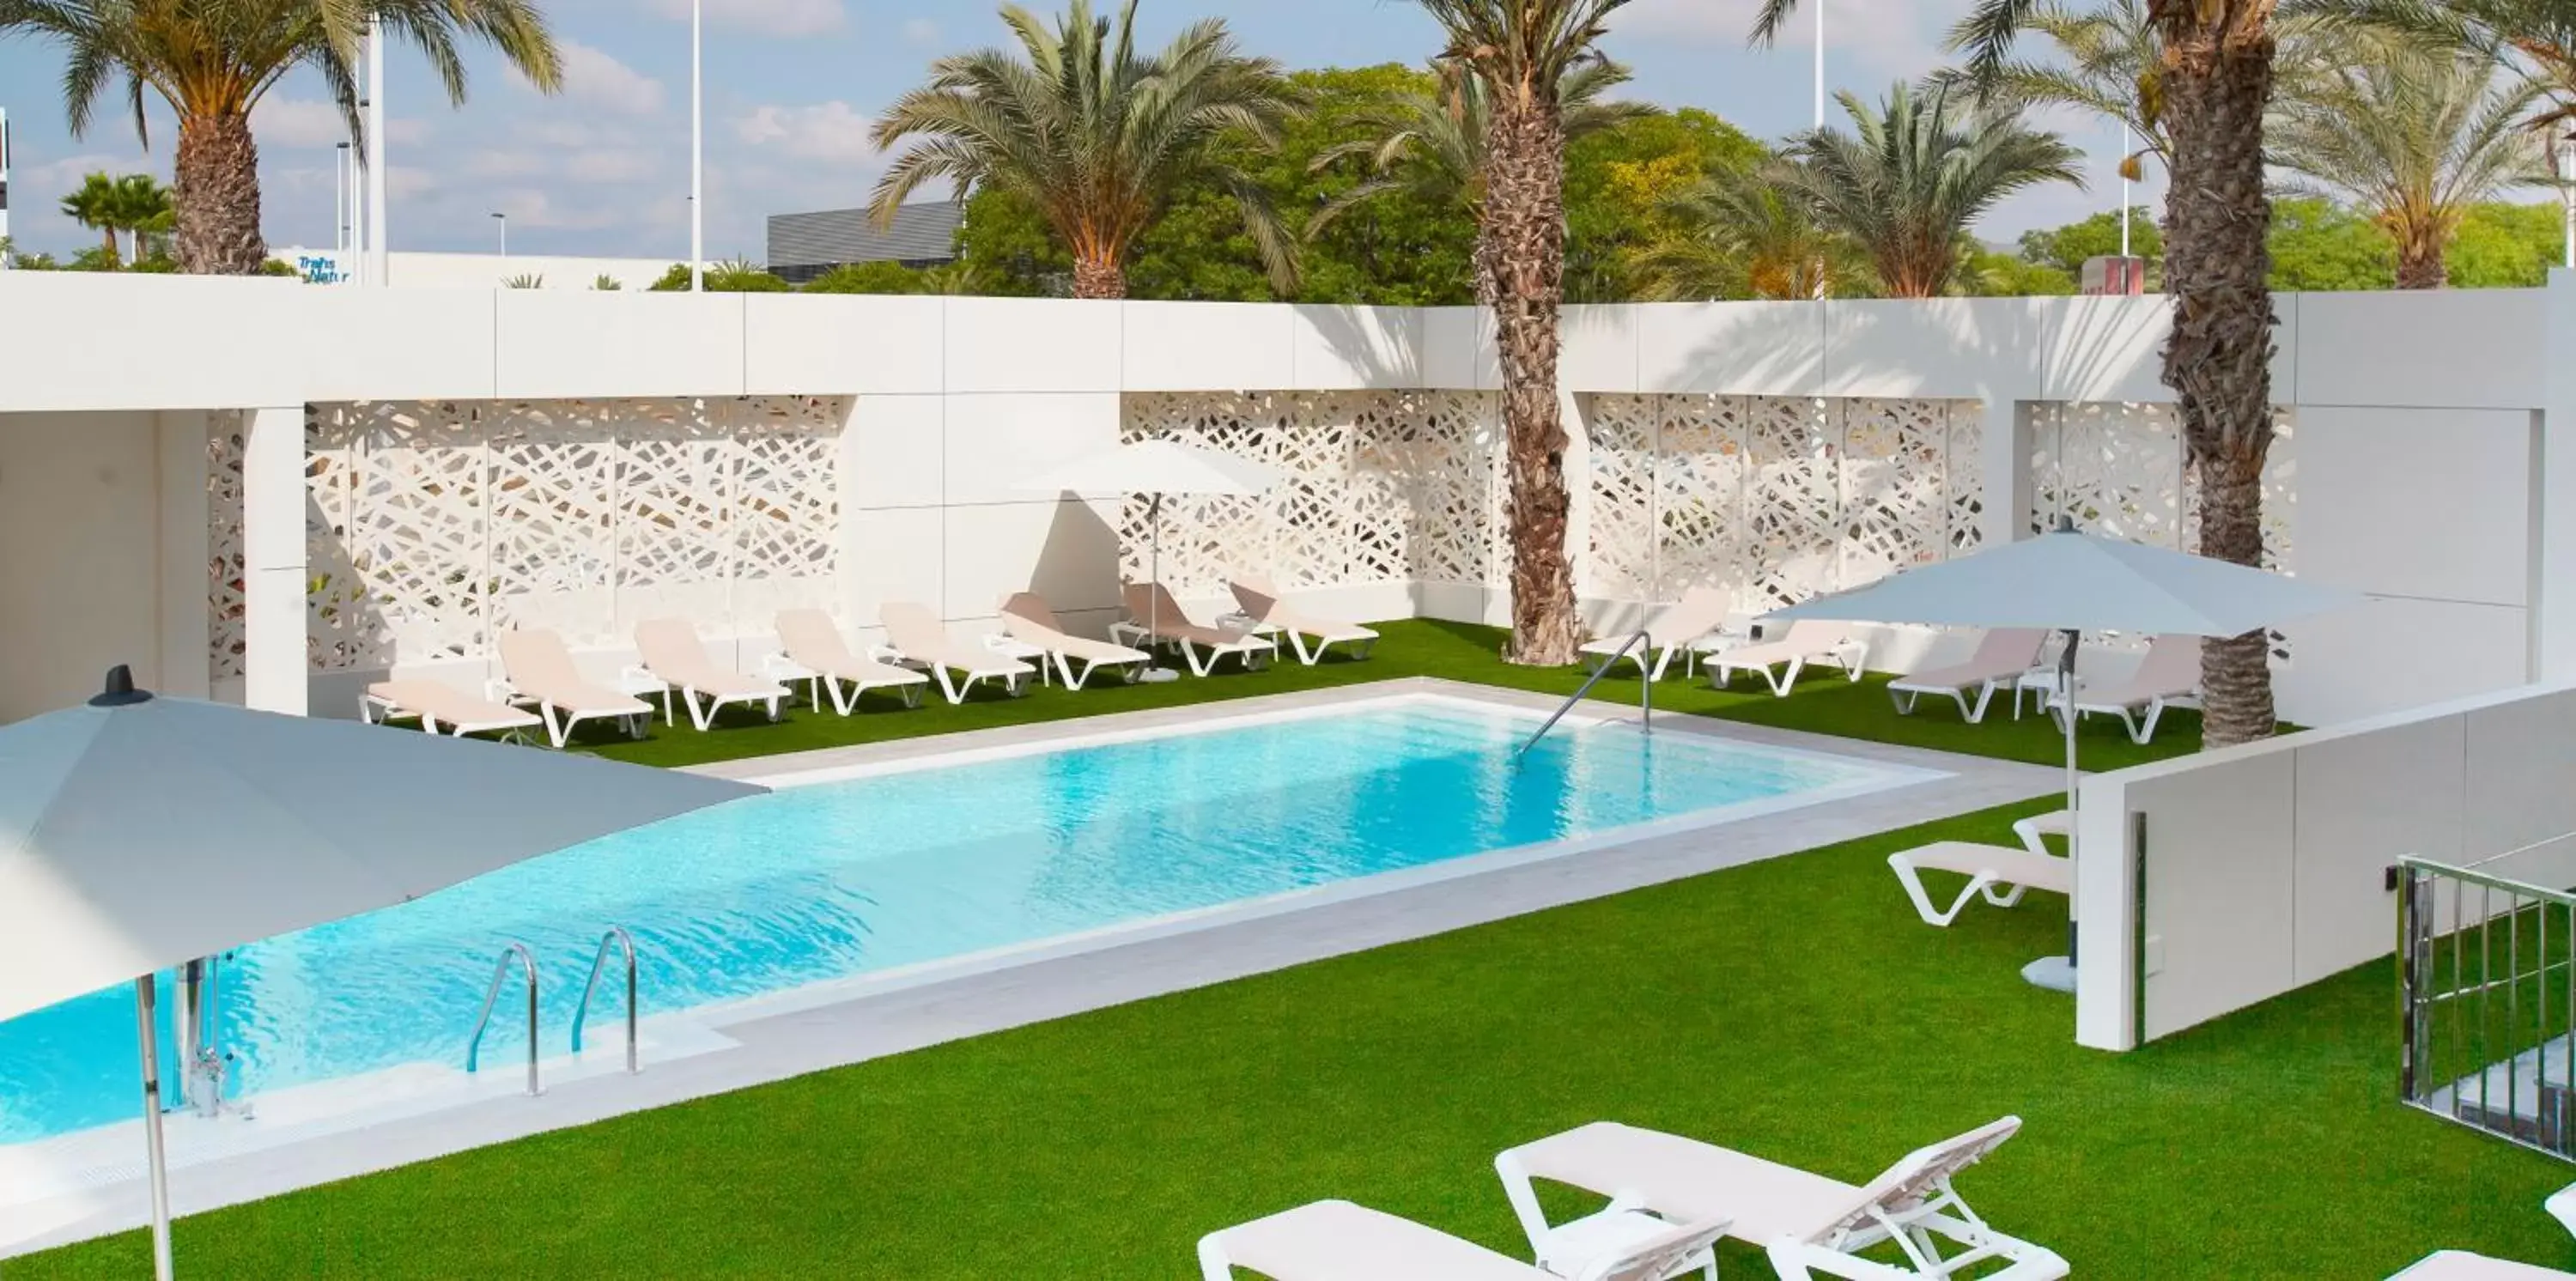 Entertainment, Swimming Pool in Port Elche